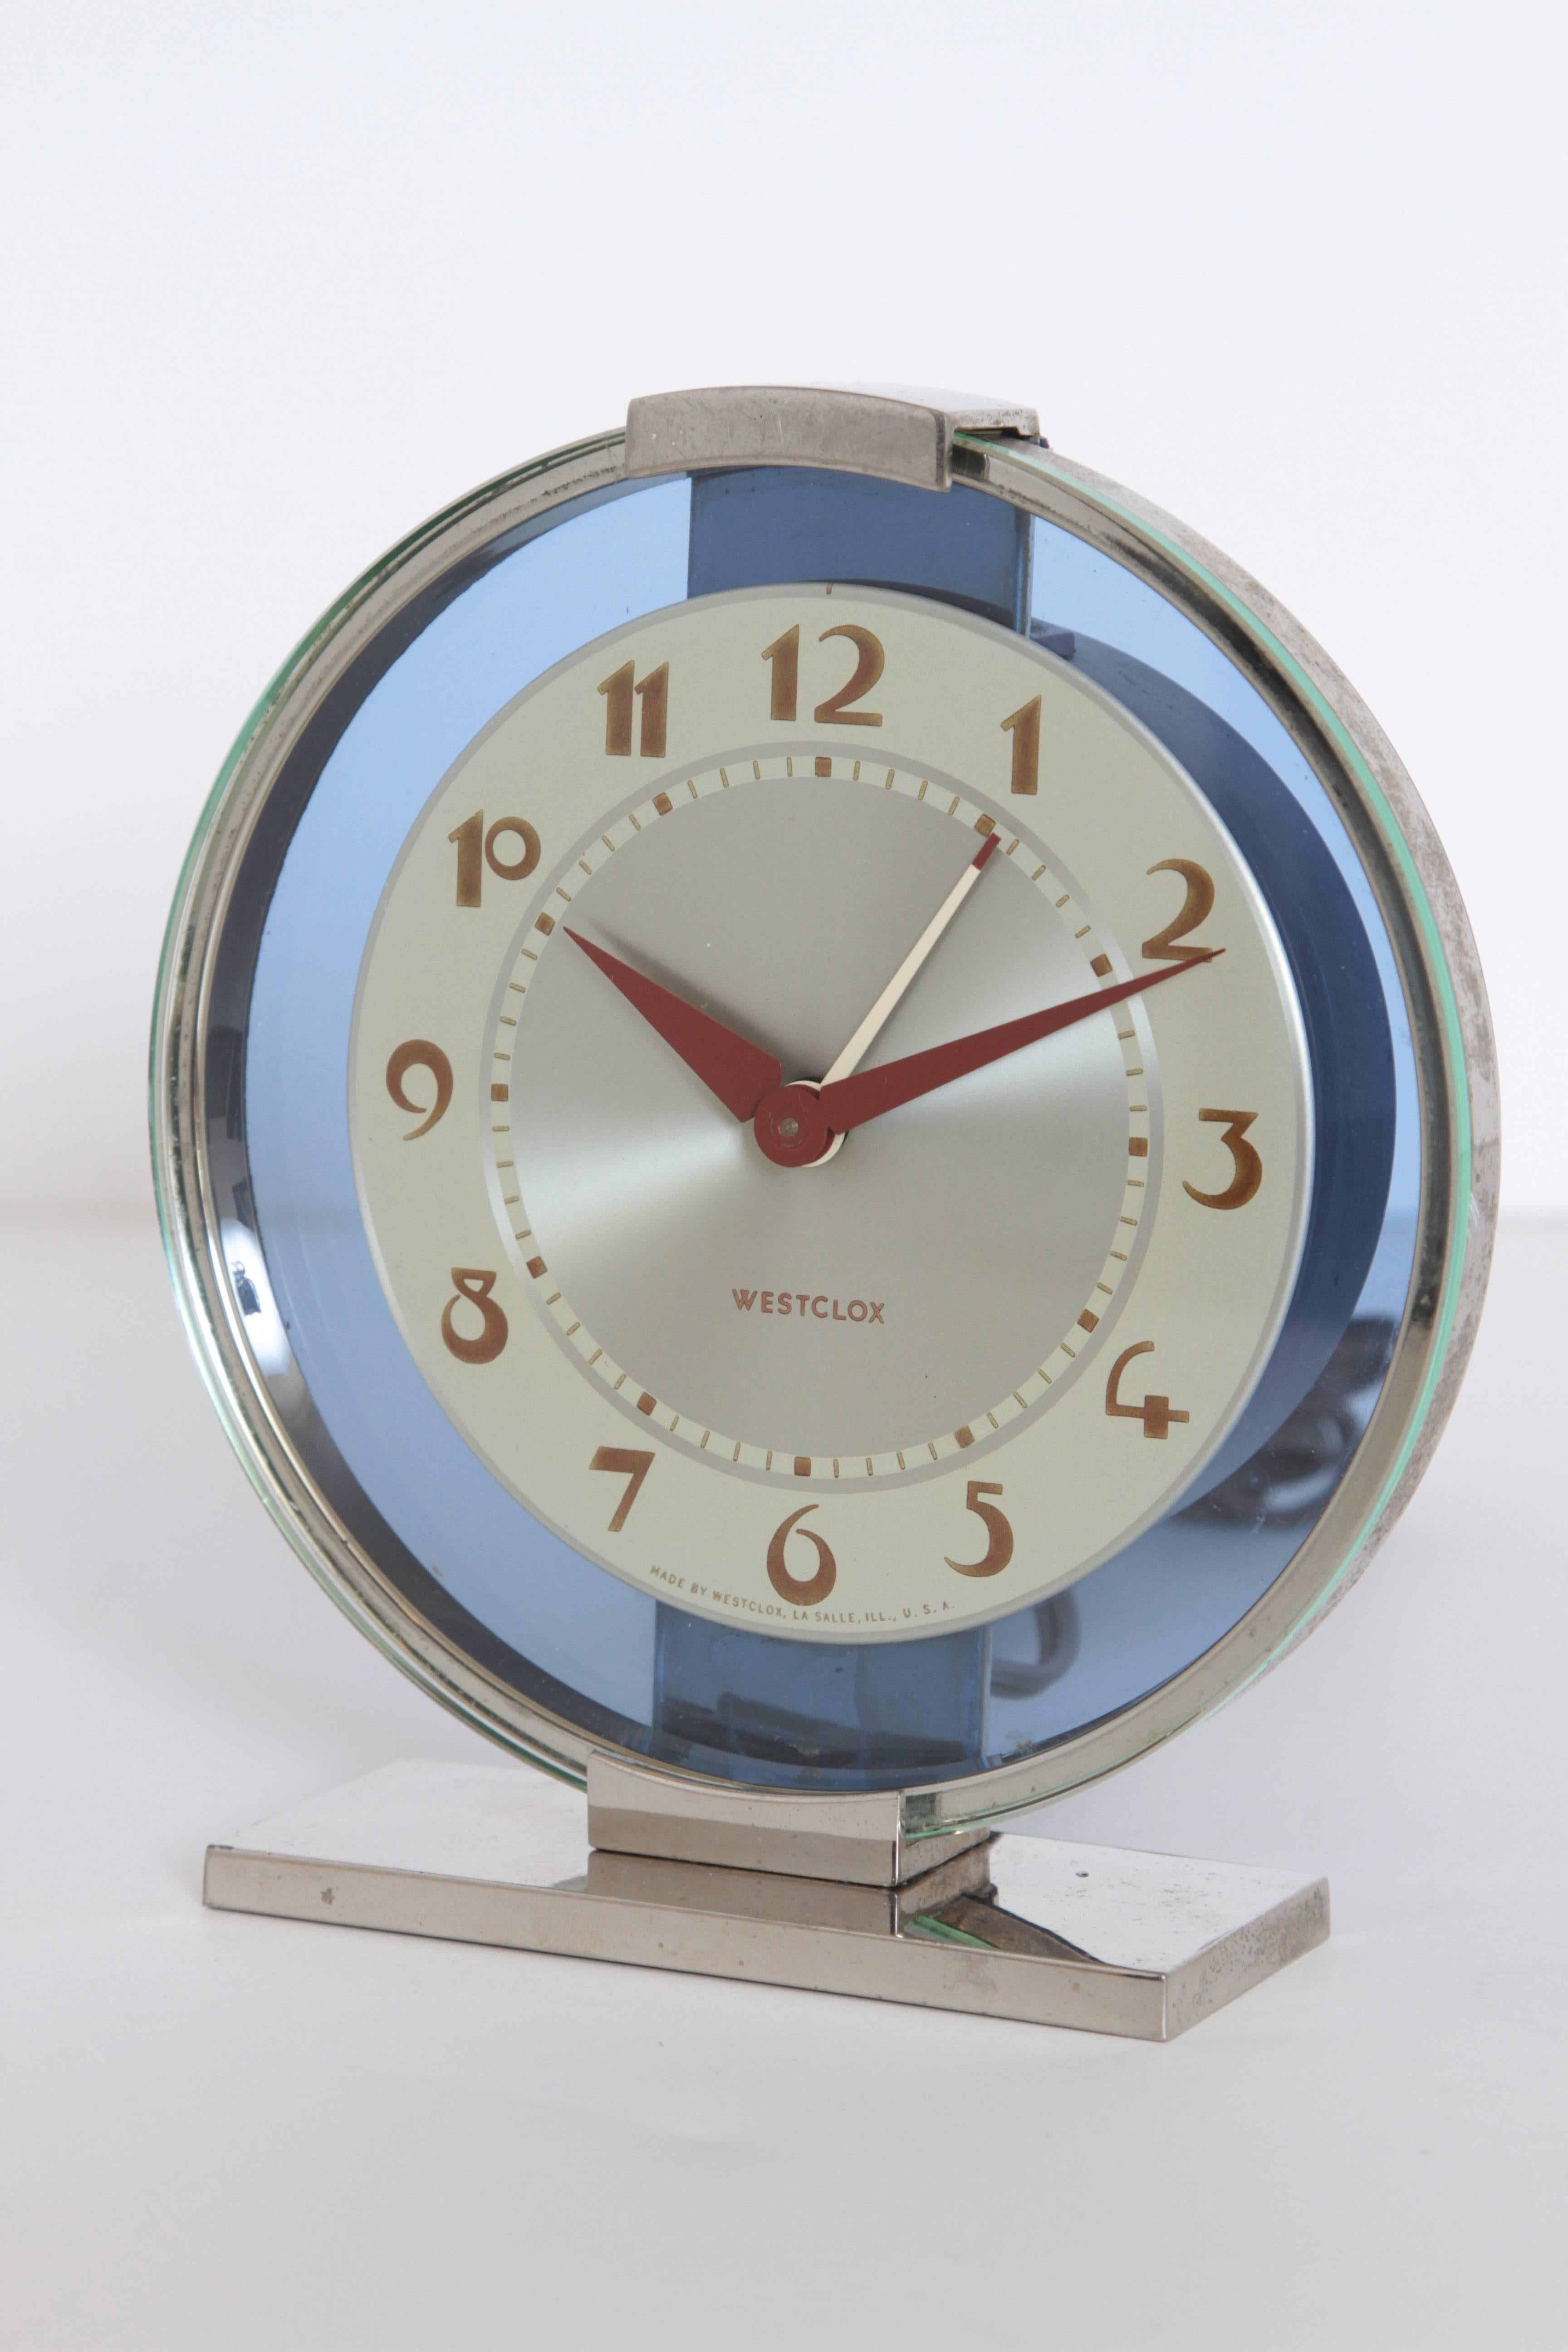 Machine Age Art Deco Westclox desk clock chrome with cobalt glass

Original model.
Polished chrome housing and base.
Original green hued glass on face with non mirrored cobalt glass behind.
Original iconic hands and face, including second hand